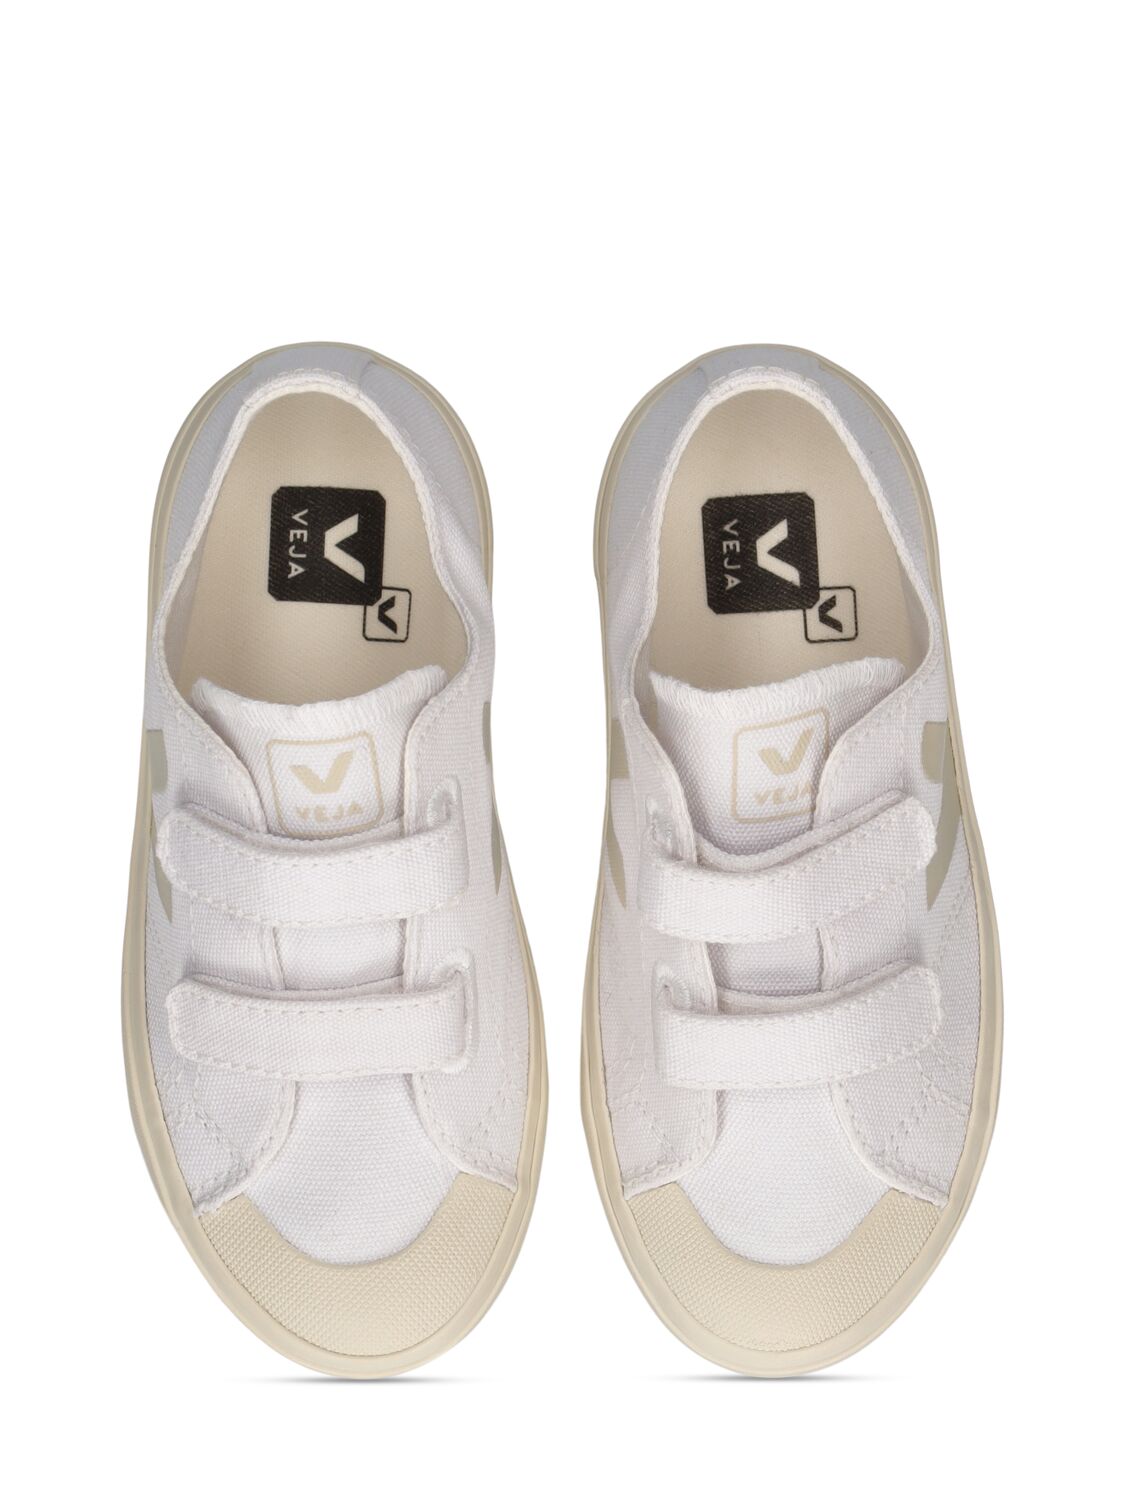 Shop Veja Ollie Cotton Canvas Strap Sneakers In White